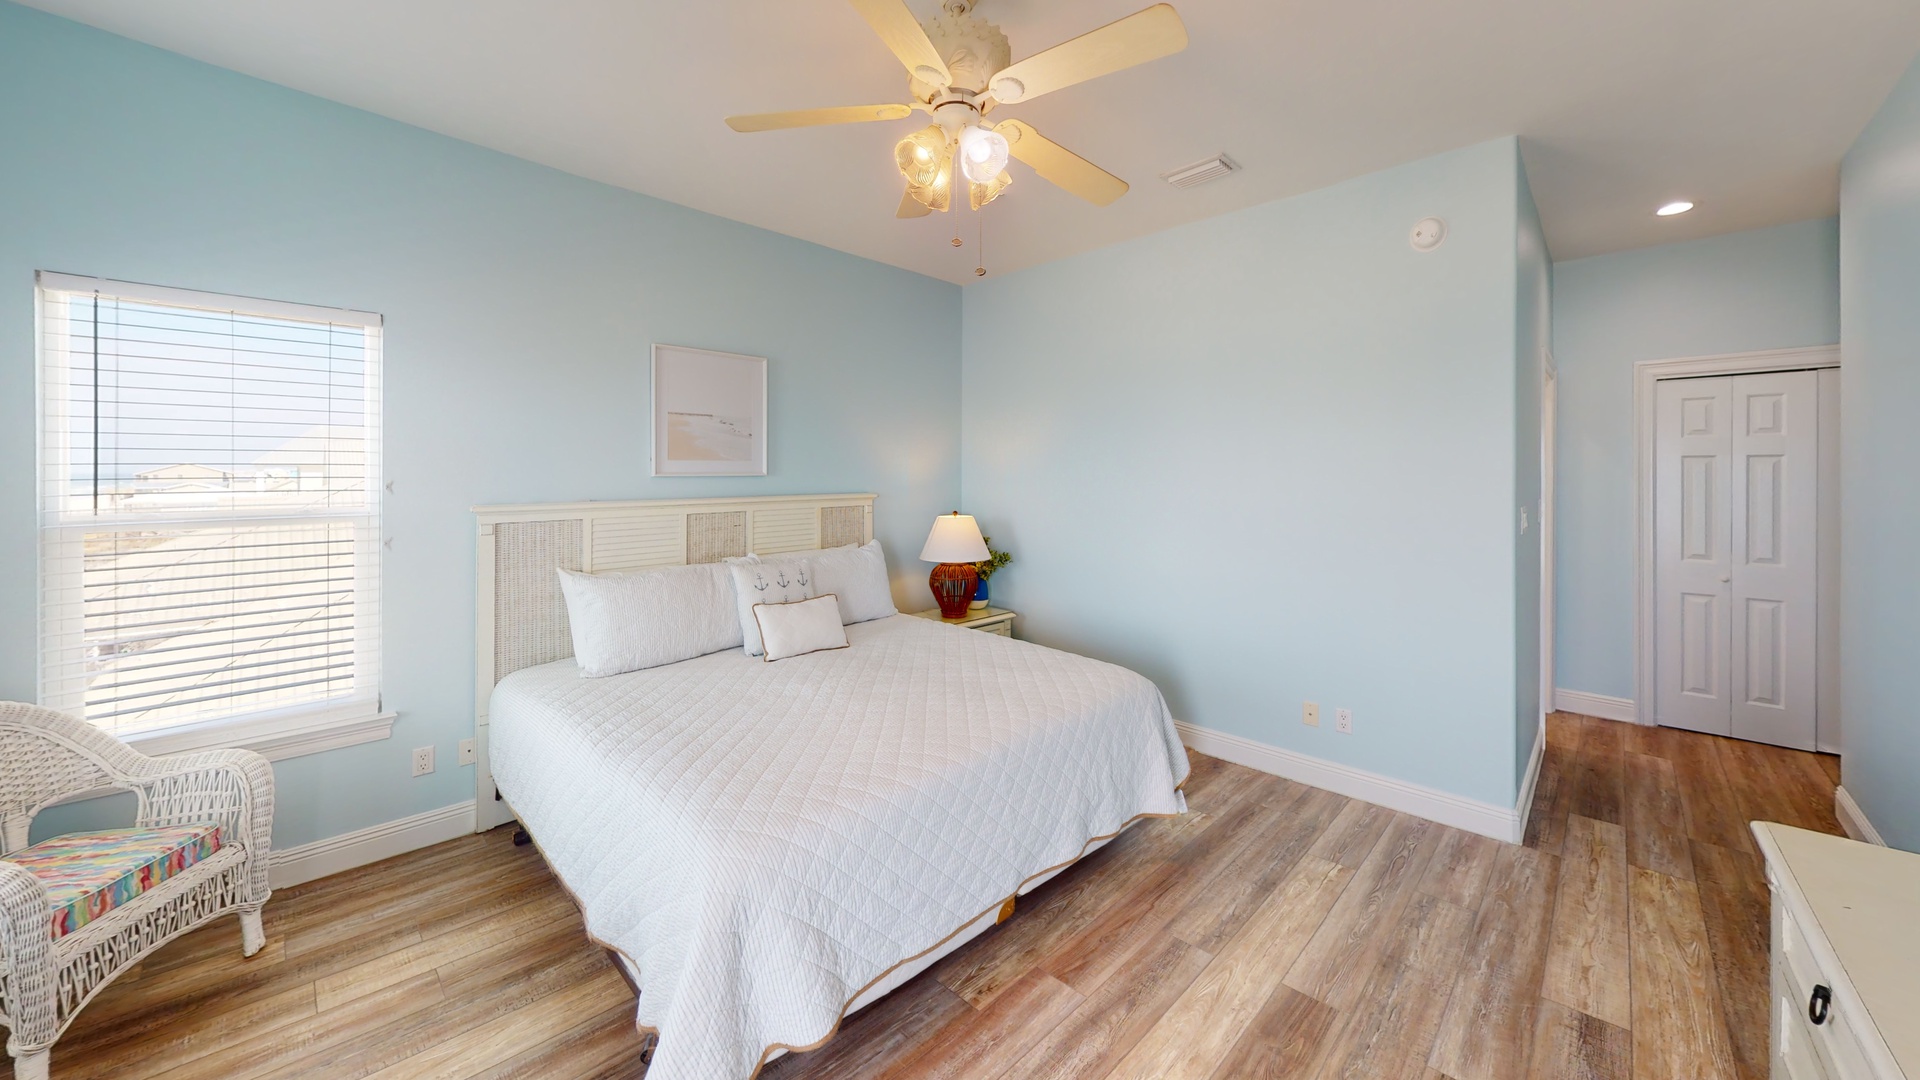 Second master bedroom( #7) features a king bed, TV with cable, access to the balcony with beach views and an attached, private bathroom